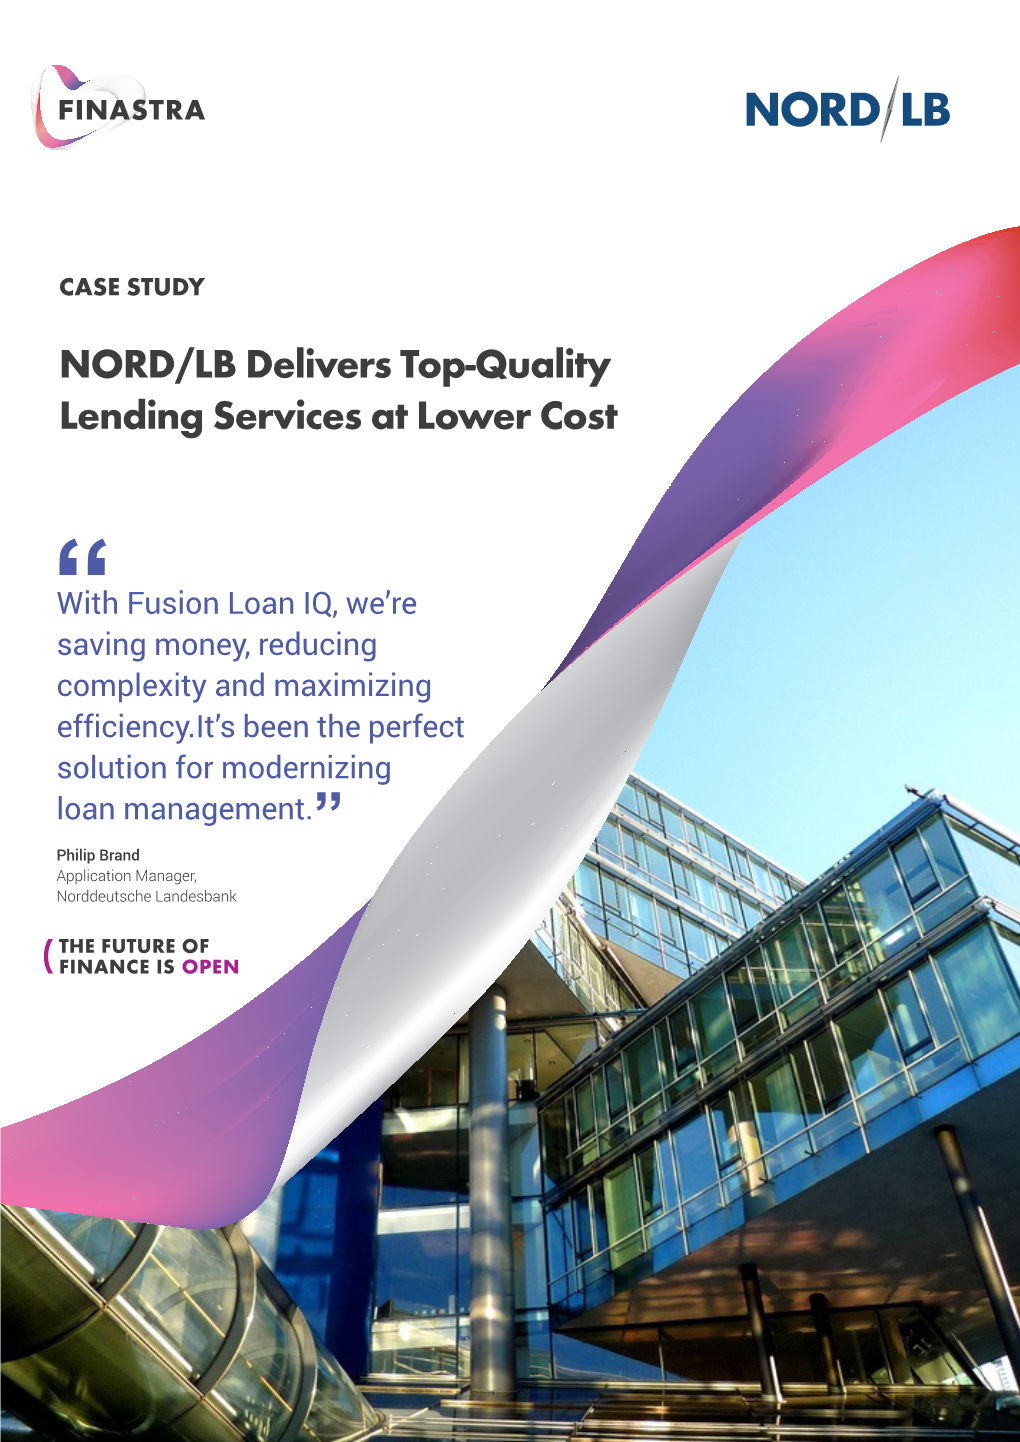 NORD/LB Delivers Top-Quality Lending Services at Lower Cost